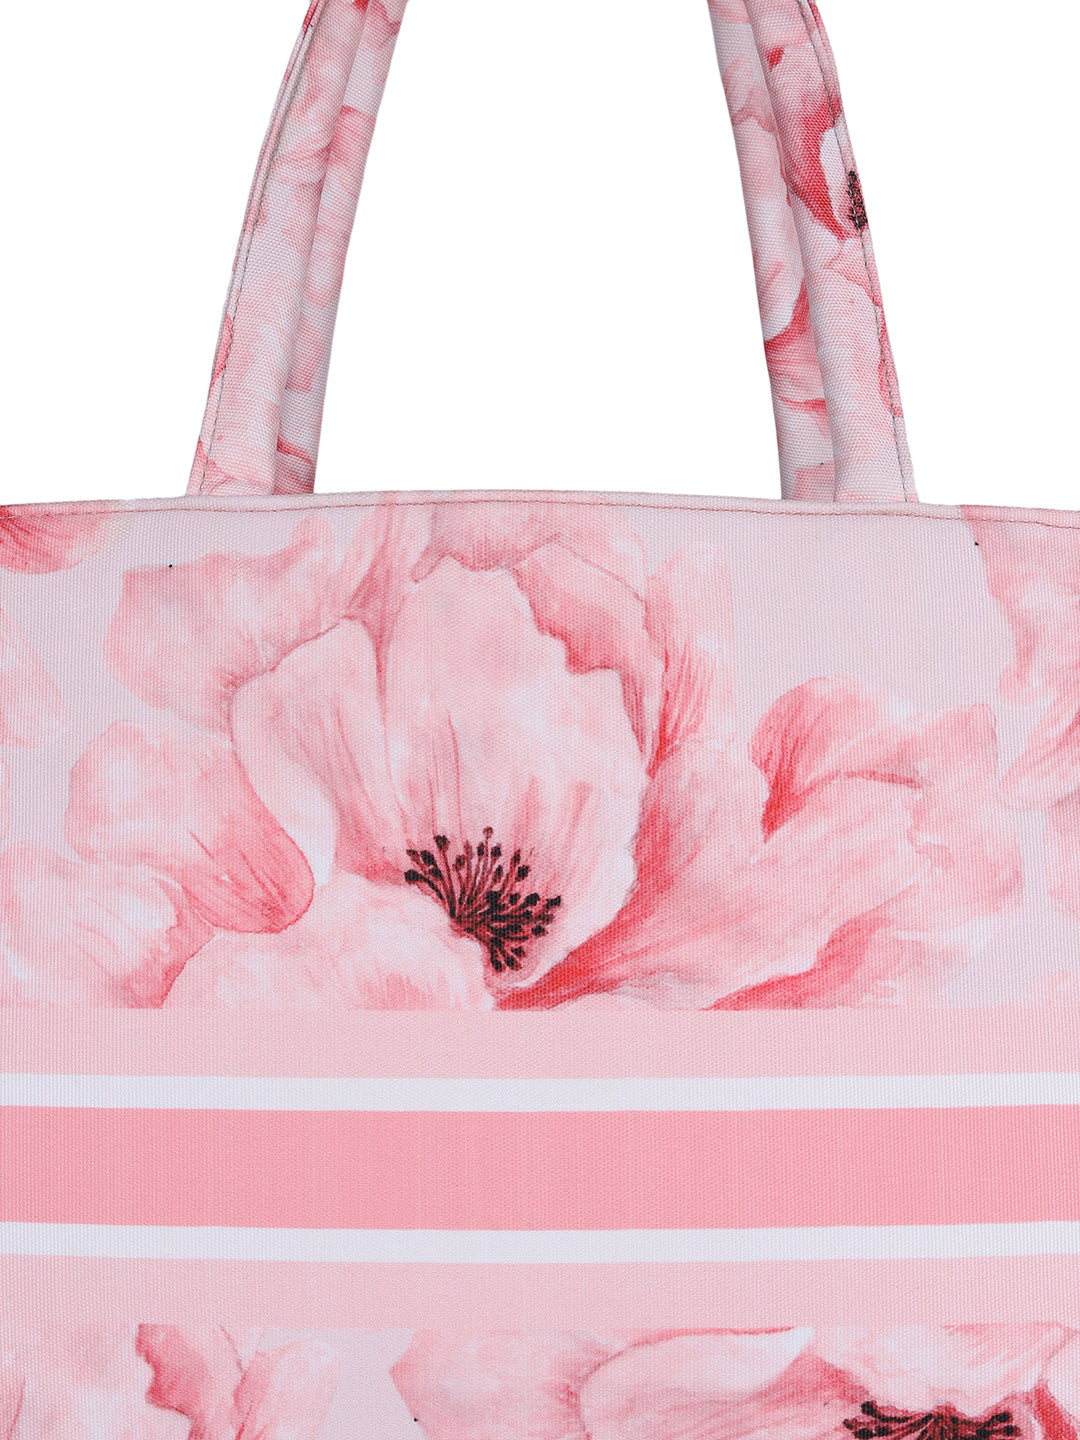 Women's Graphic Printed Canvas Tote Bag